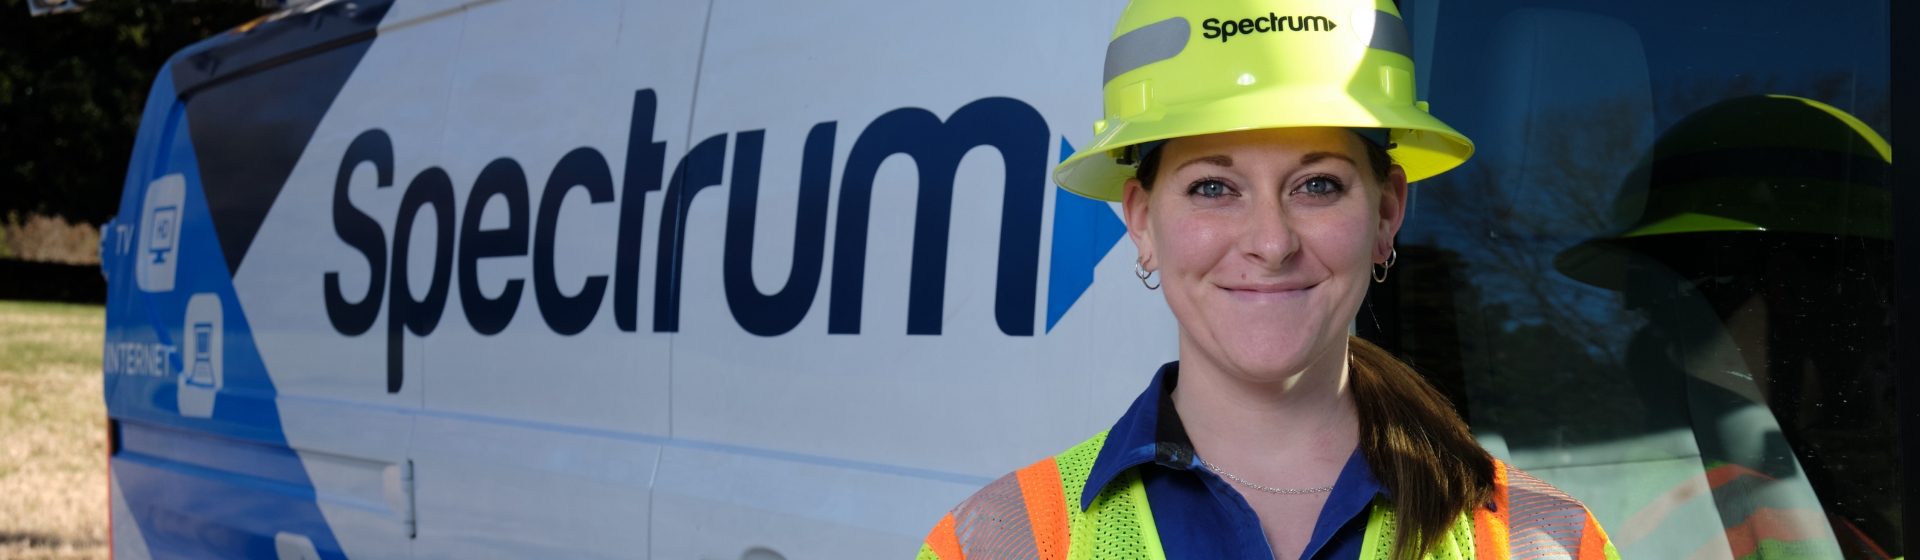 Female employee with hardhat is smiling while standing next to a Spectrum van